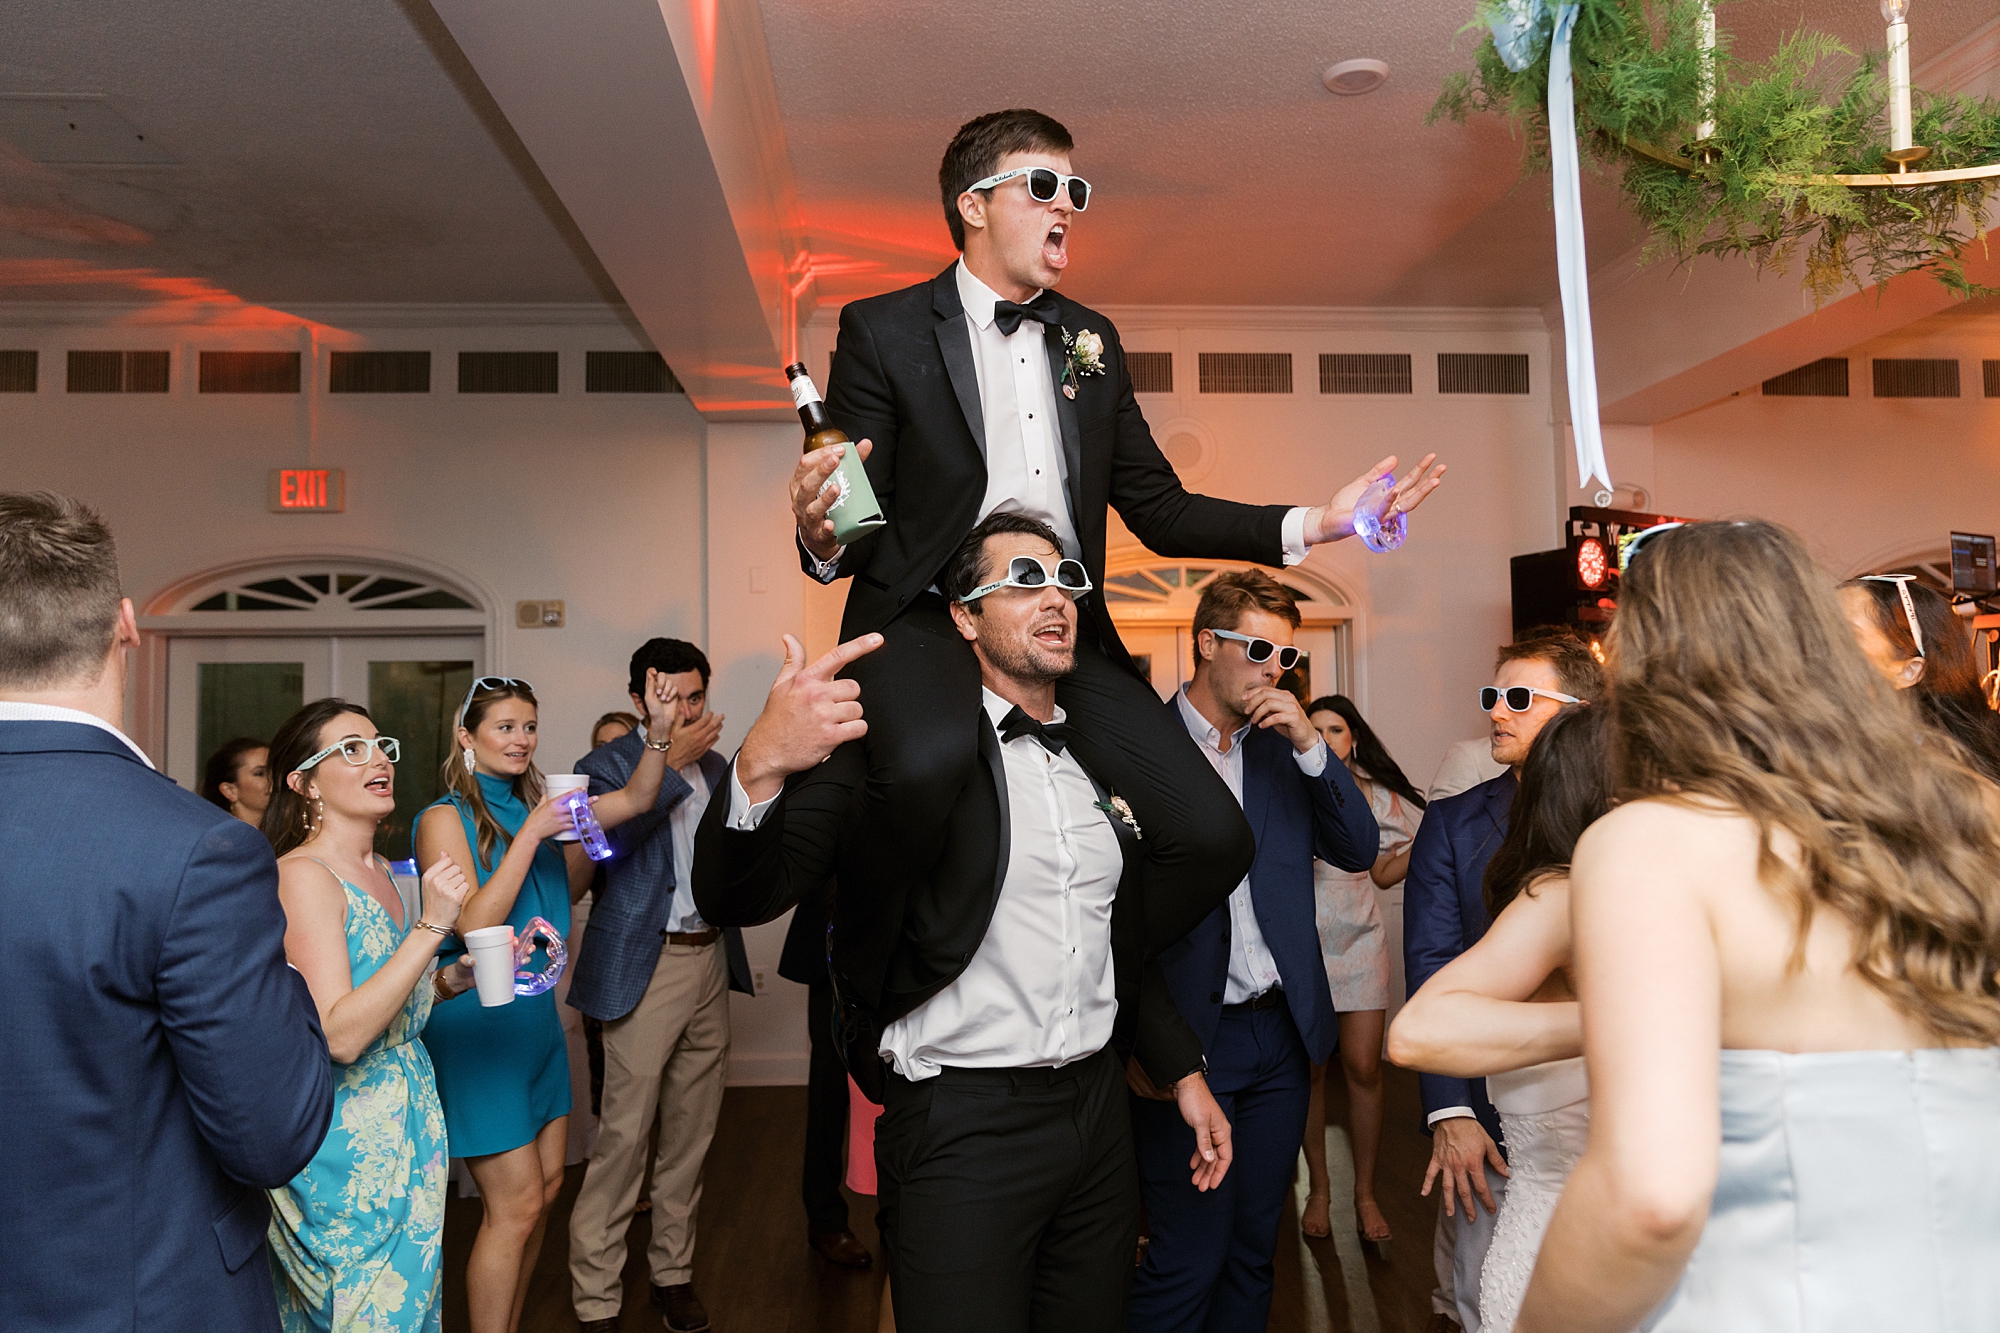 guests dance with live band during Oakbourne Country Club wedding reception 